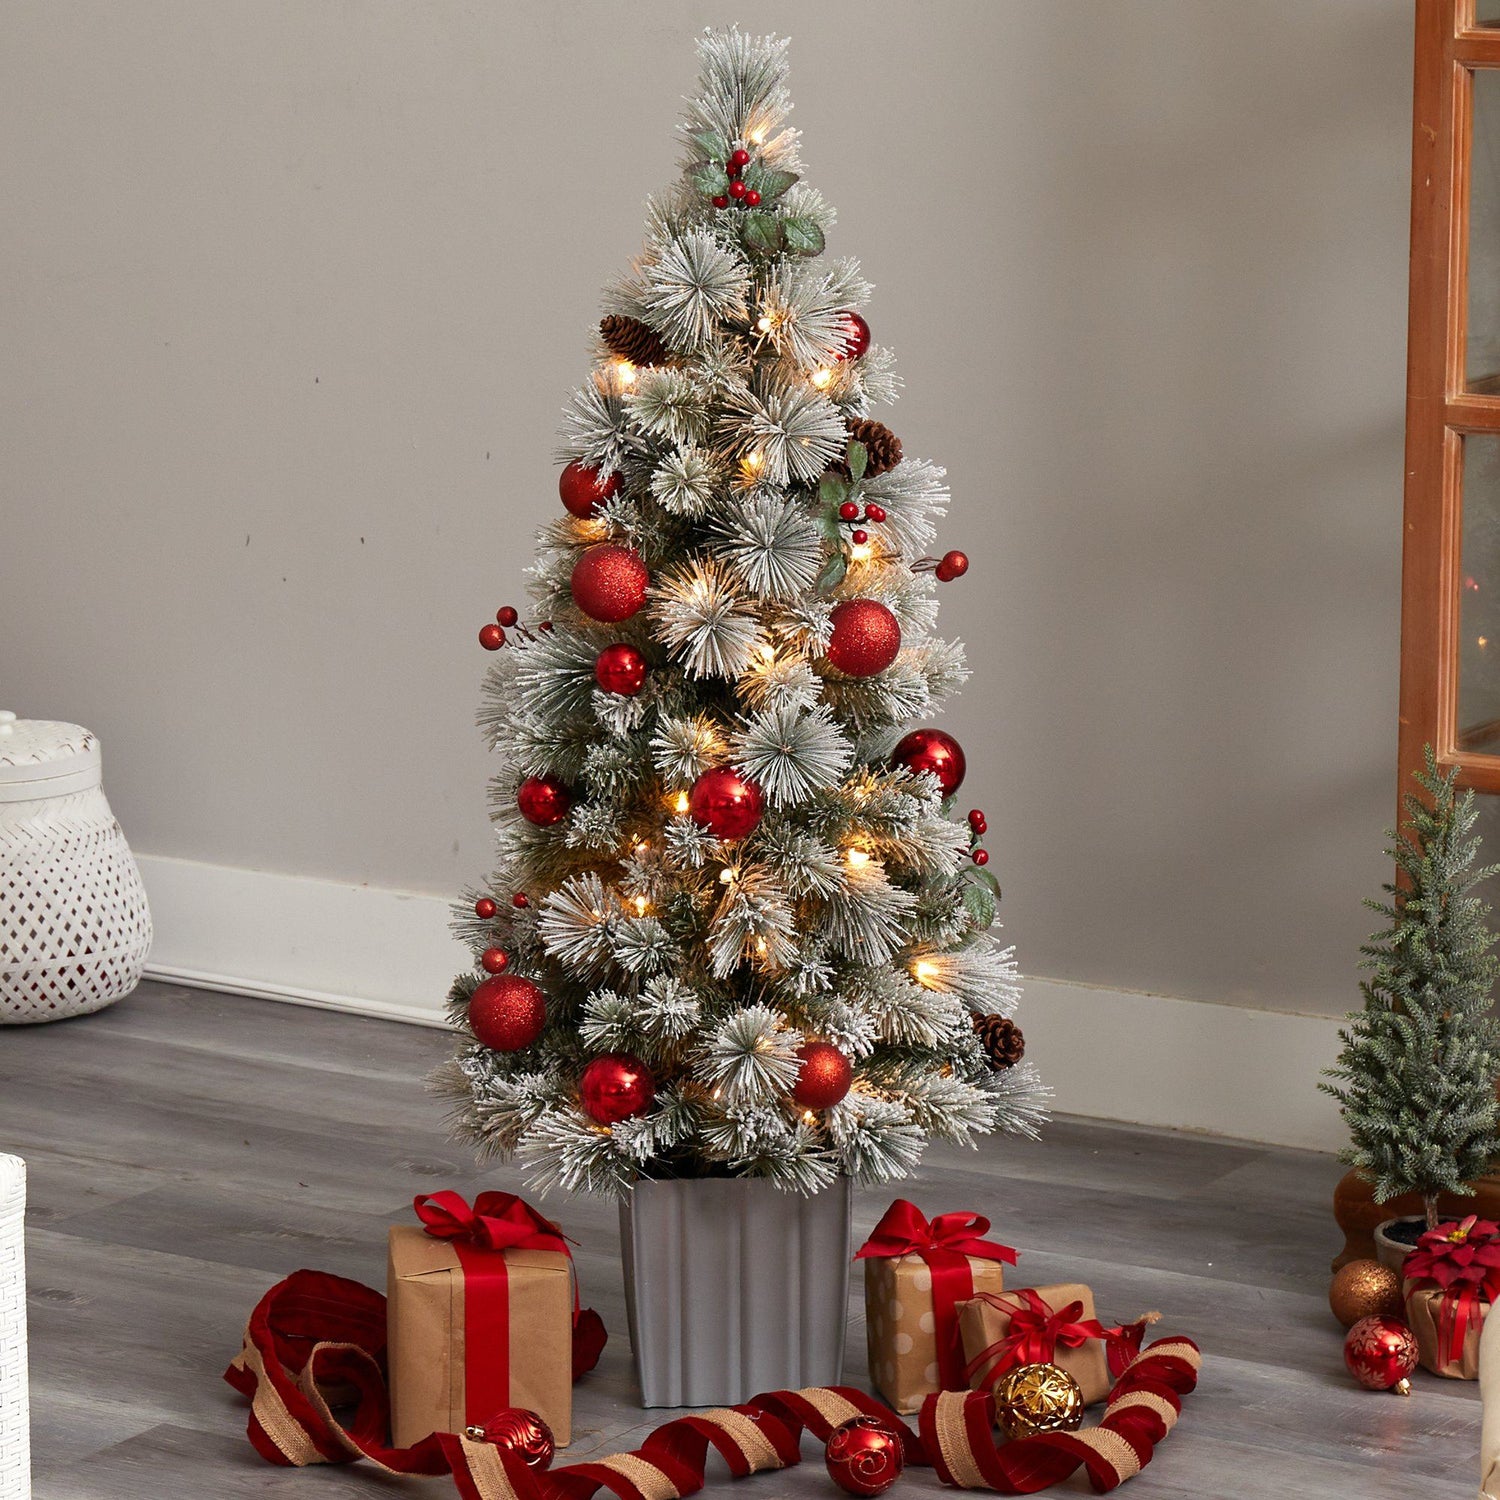 4' Winter Flocked Christmas Tree Pre-Lit with 50 Lights and Ornaments in Decorative Planter